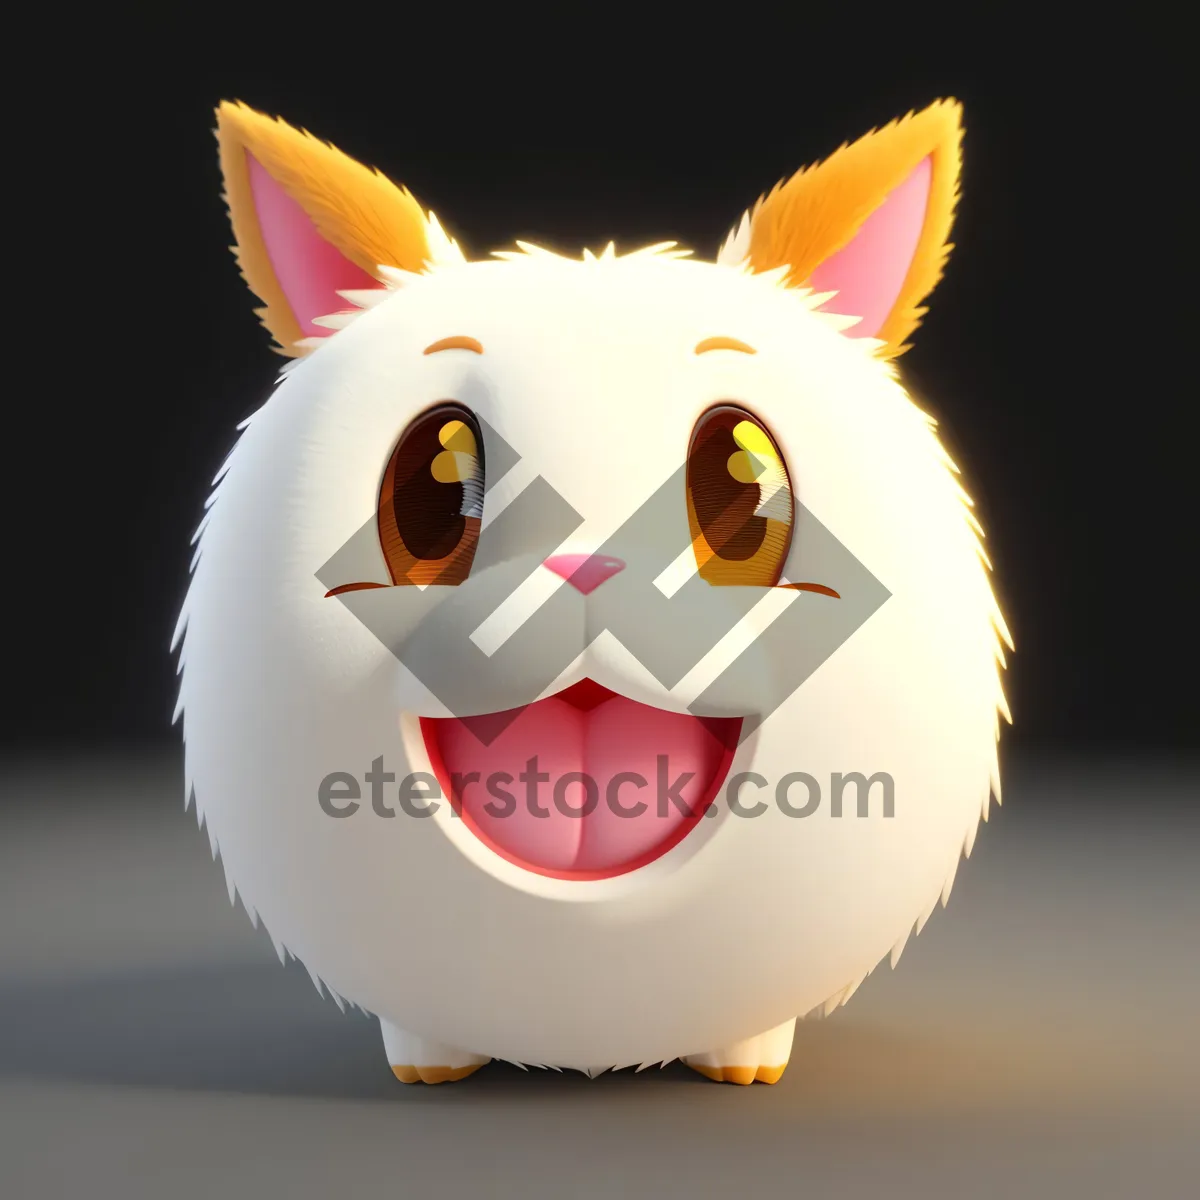 Picture of Cute Piggy Bank Cartoon with Coins